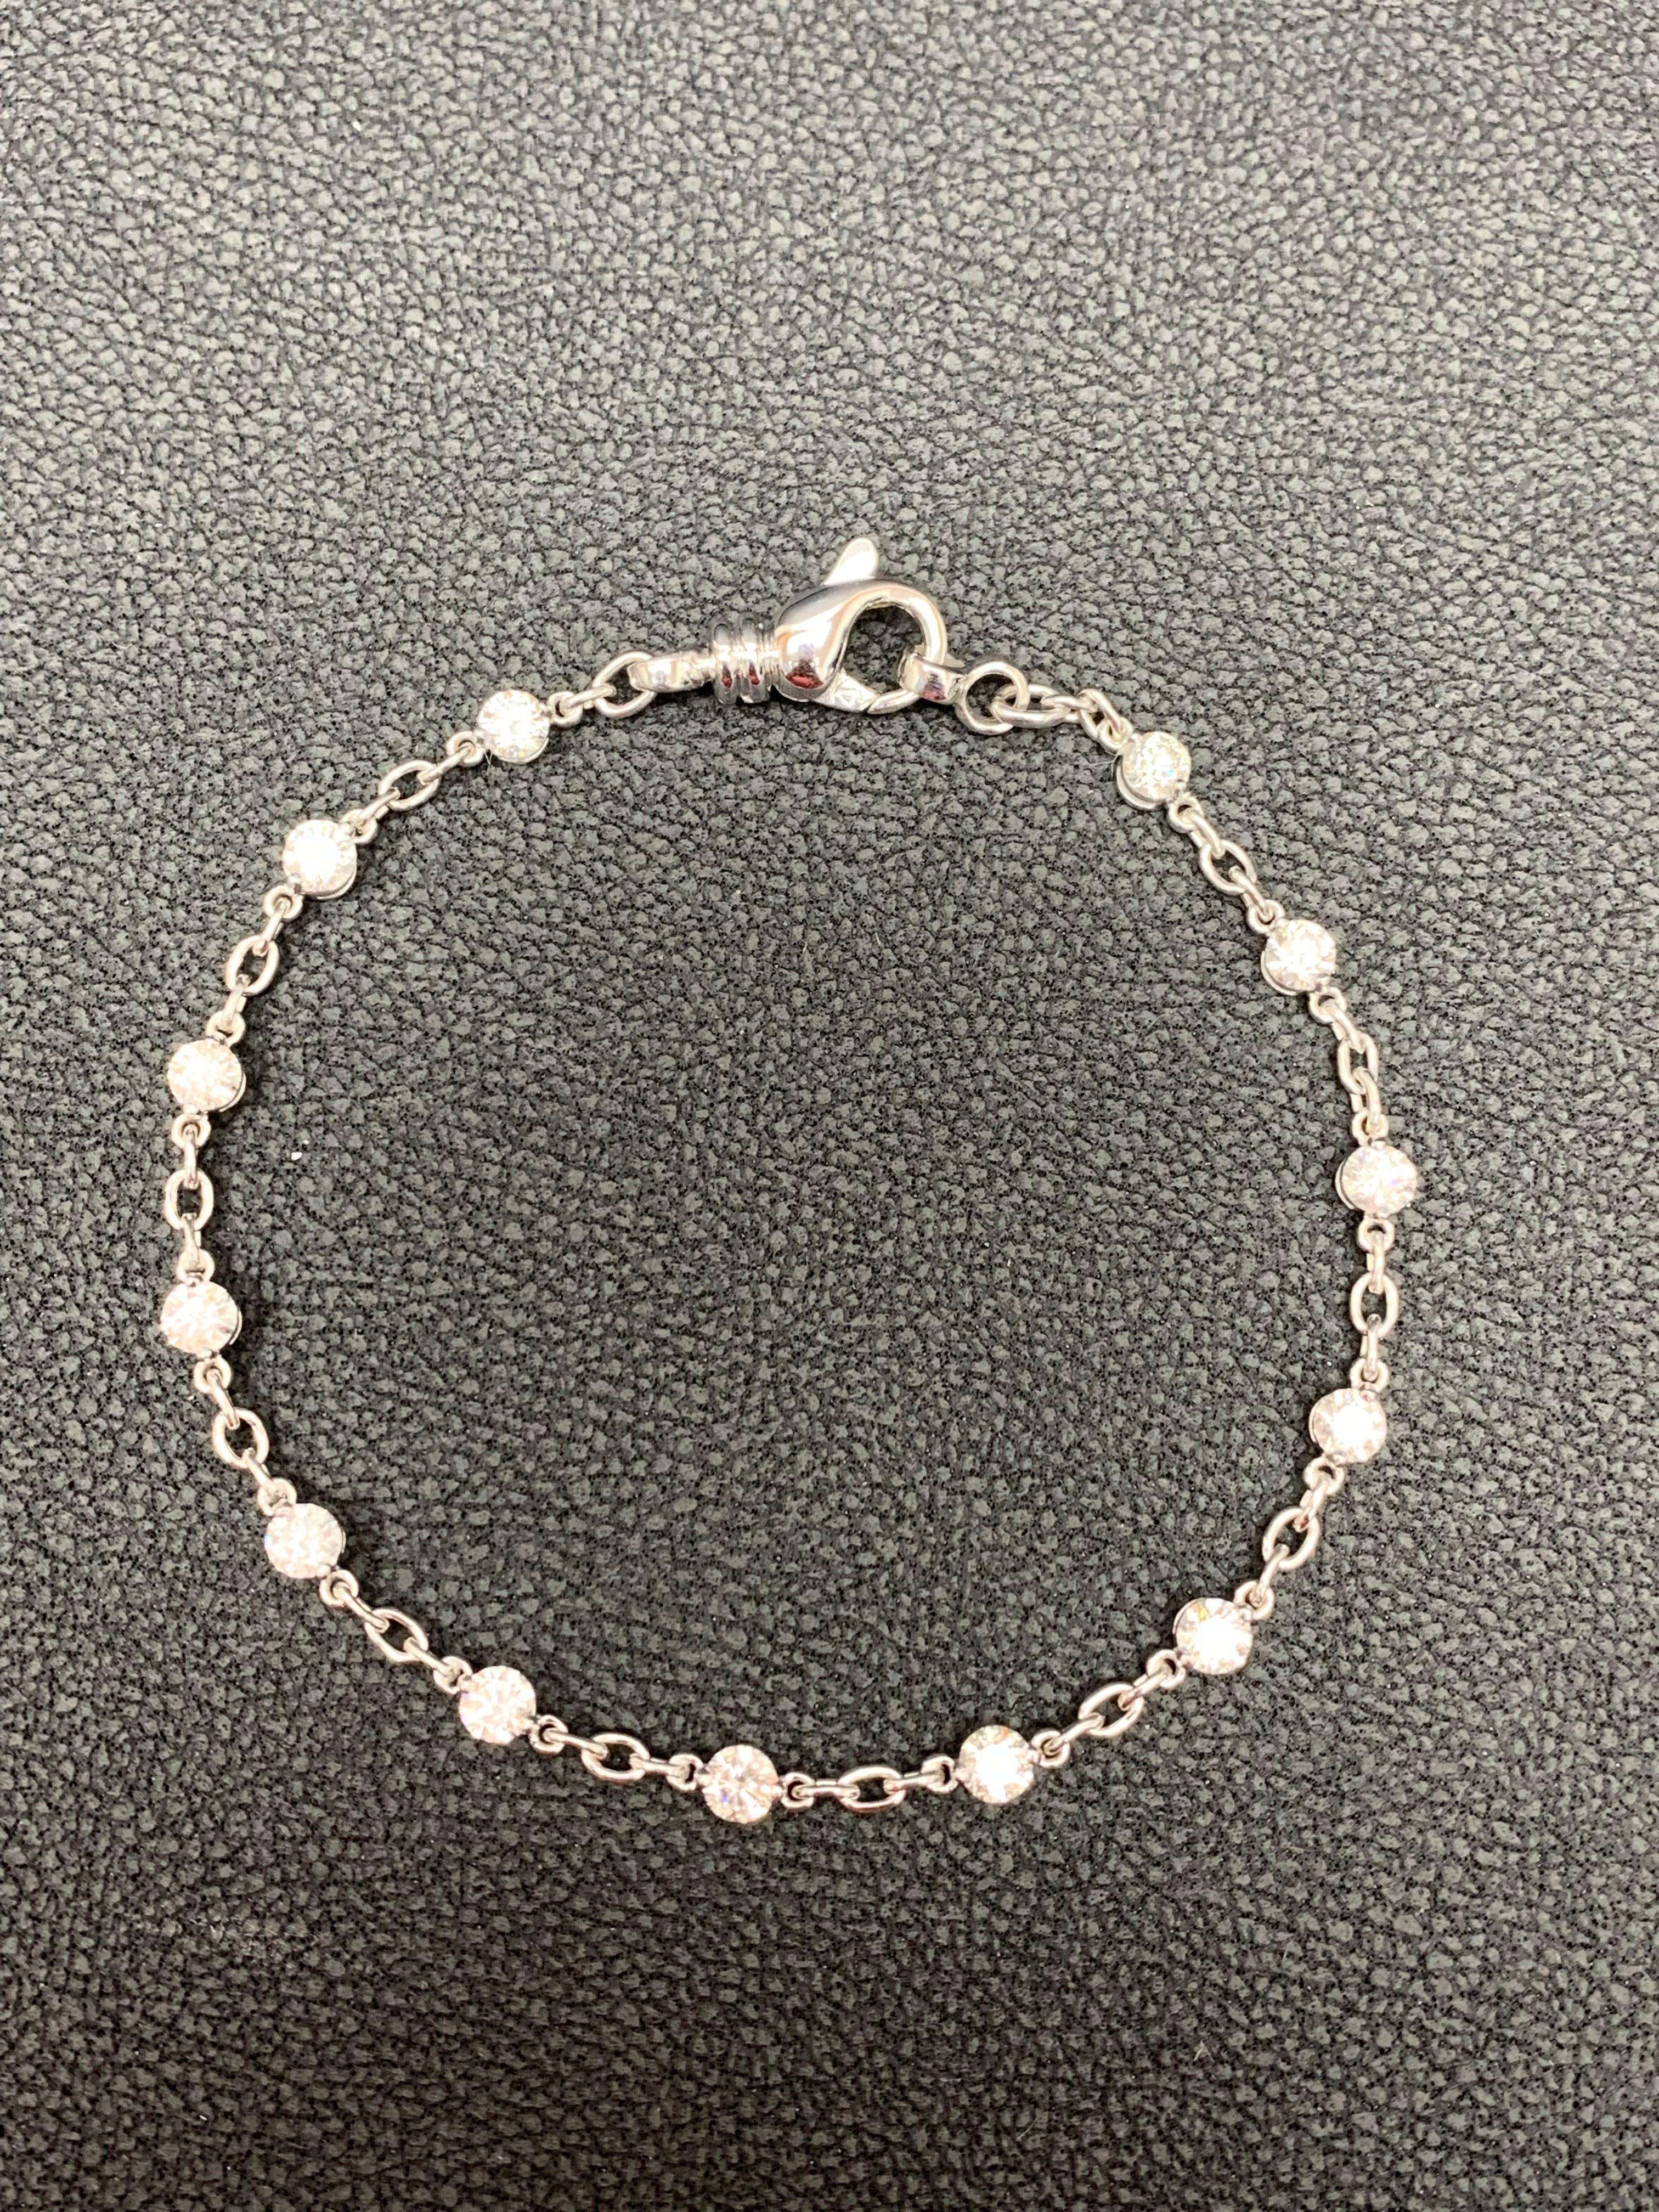 A modern 7 inch chain bracelet showcasing 14 round diamonds in a 2 prong setting in 18 karat white gold. Diamonds weigh 2.01 carats total.

Style available in different price ranges. Prices are based on your selection. Please contact us for more